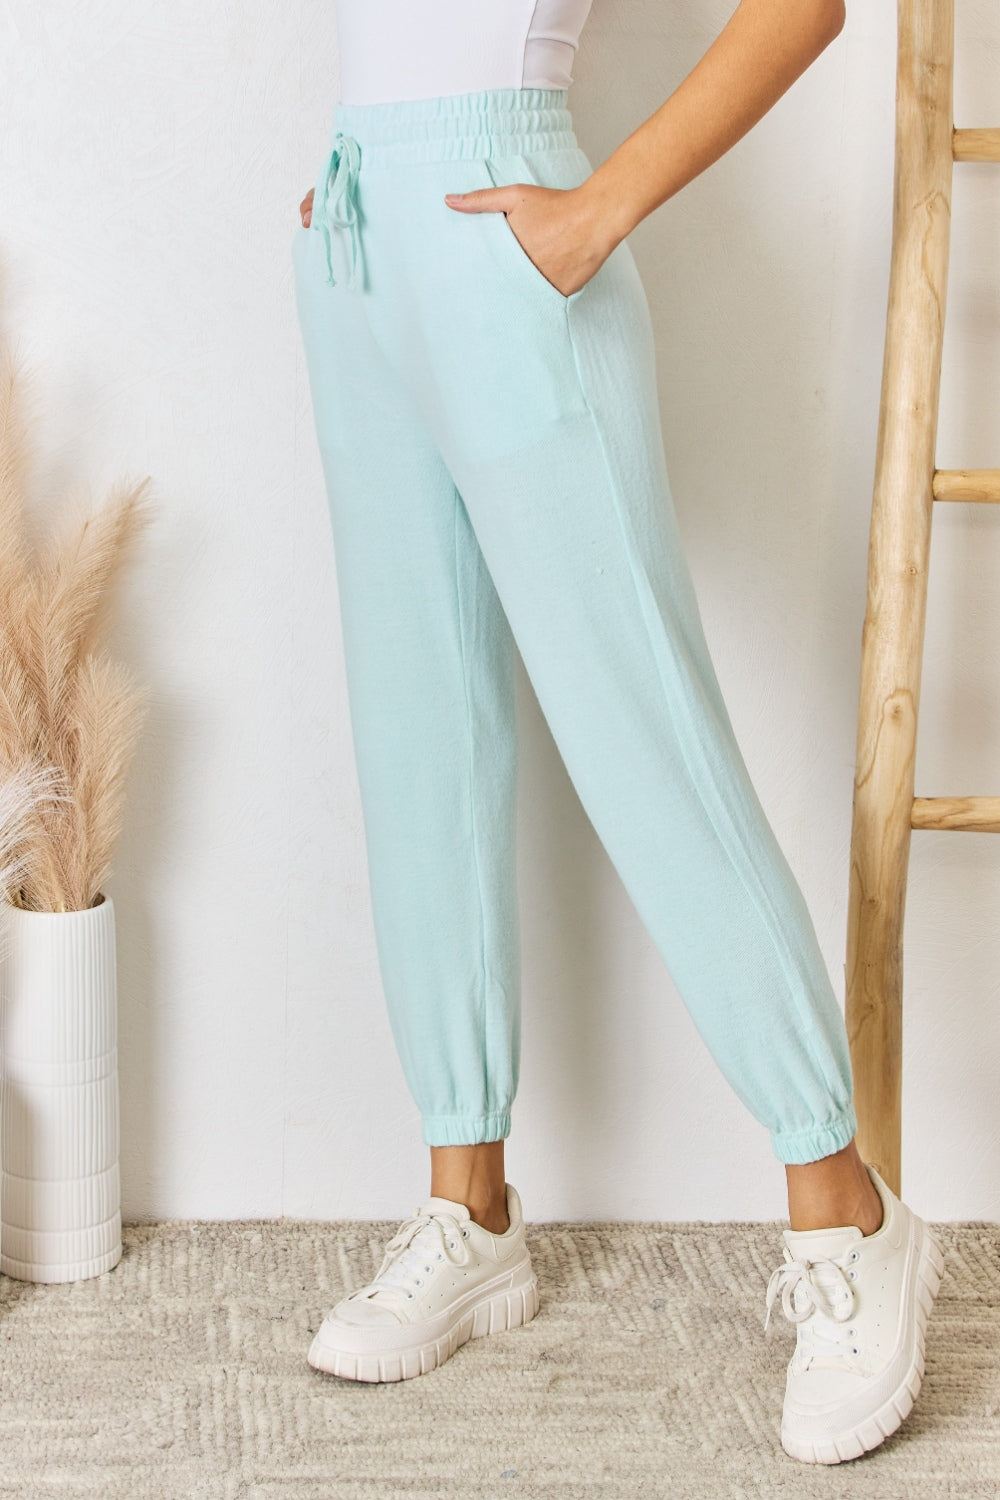 RISEN Joggers - Mint - Inspired Eye Boutique